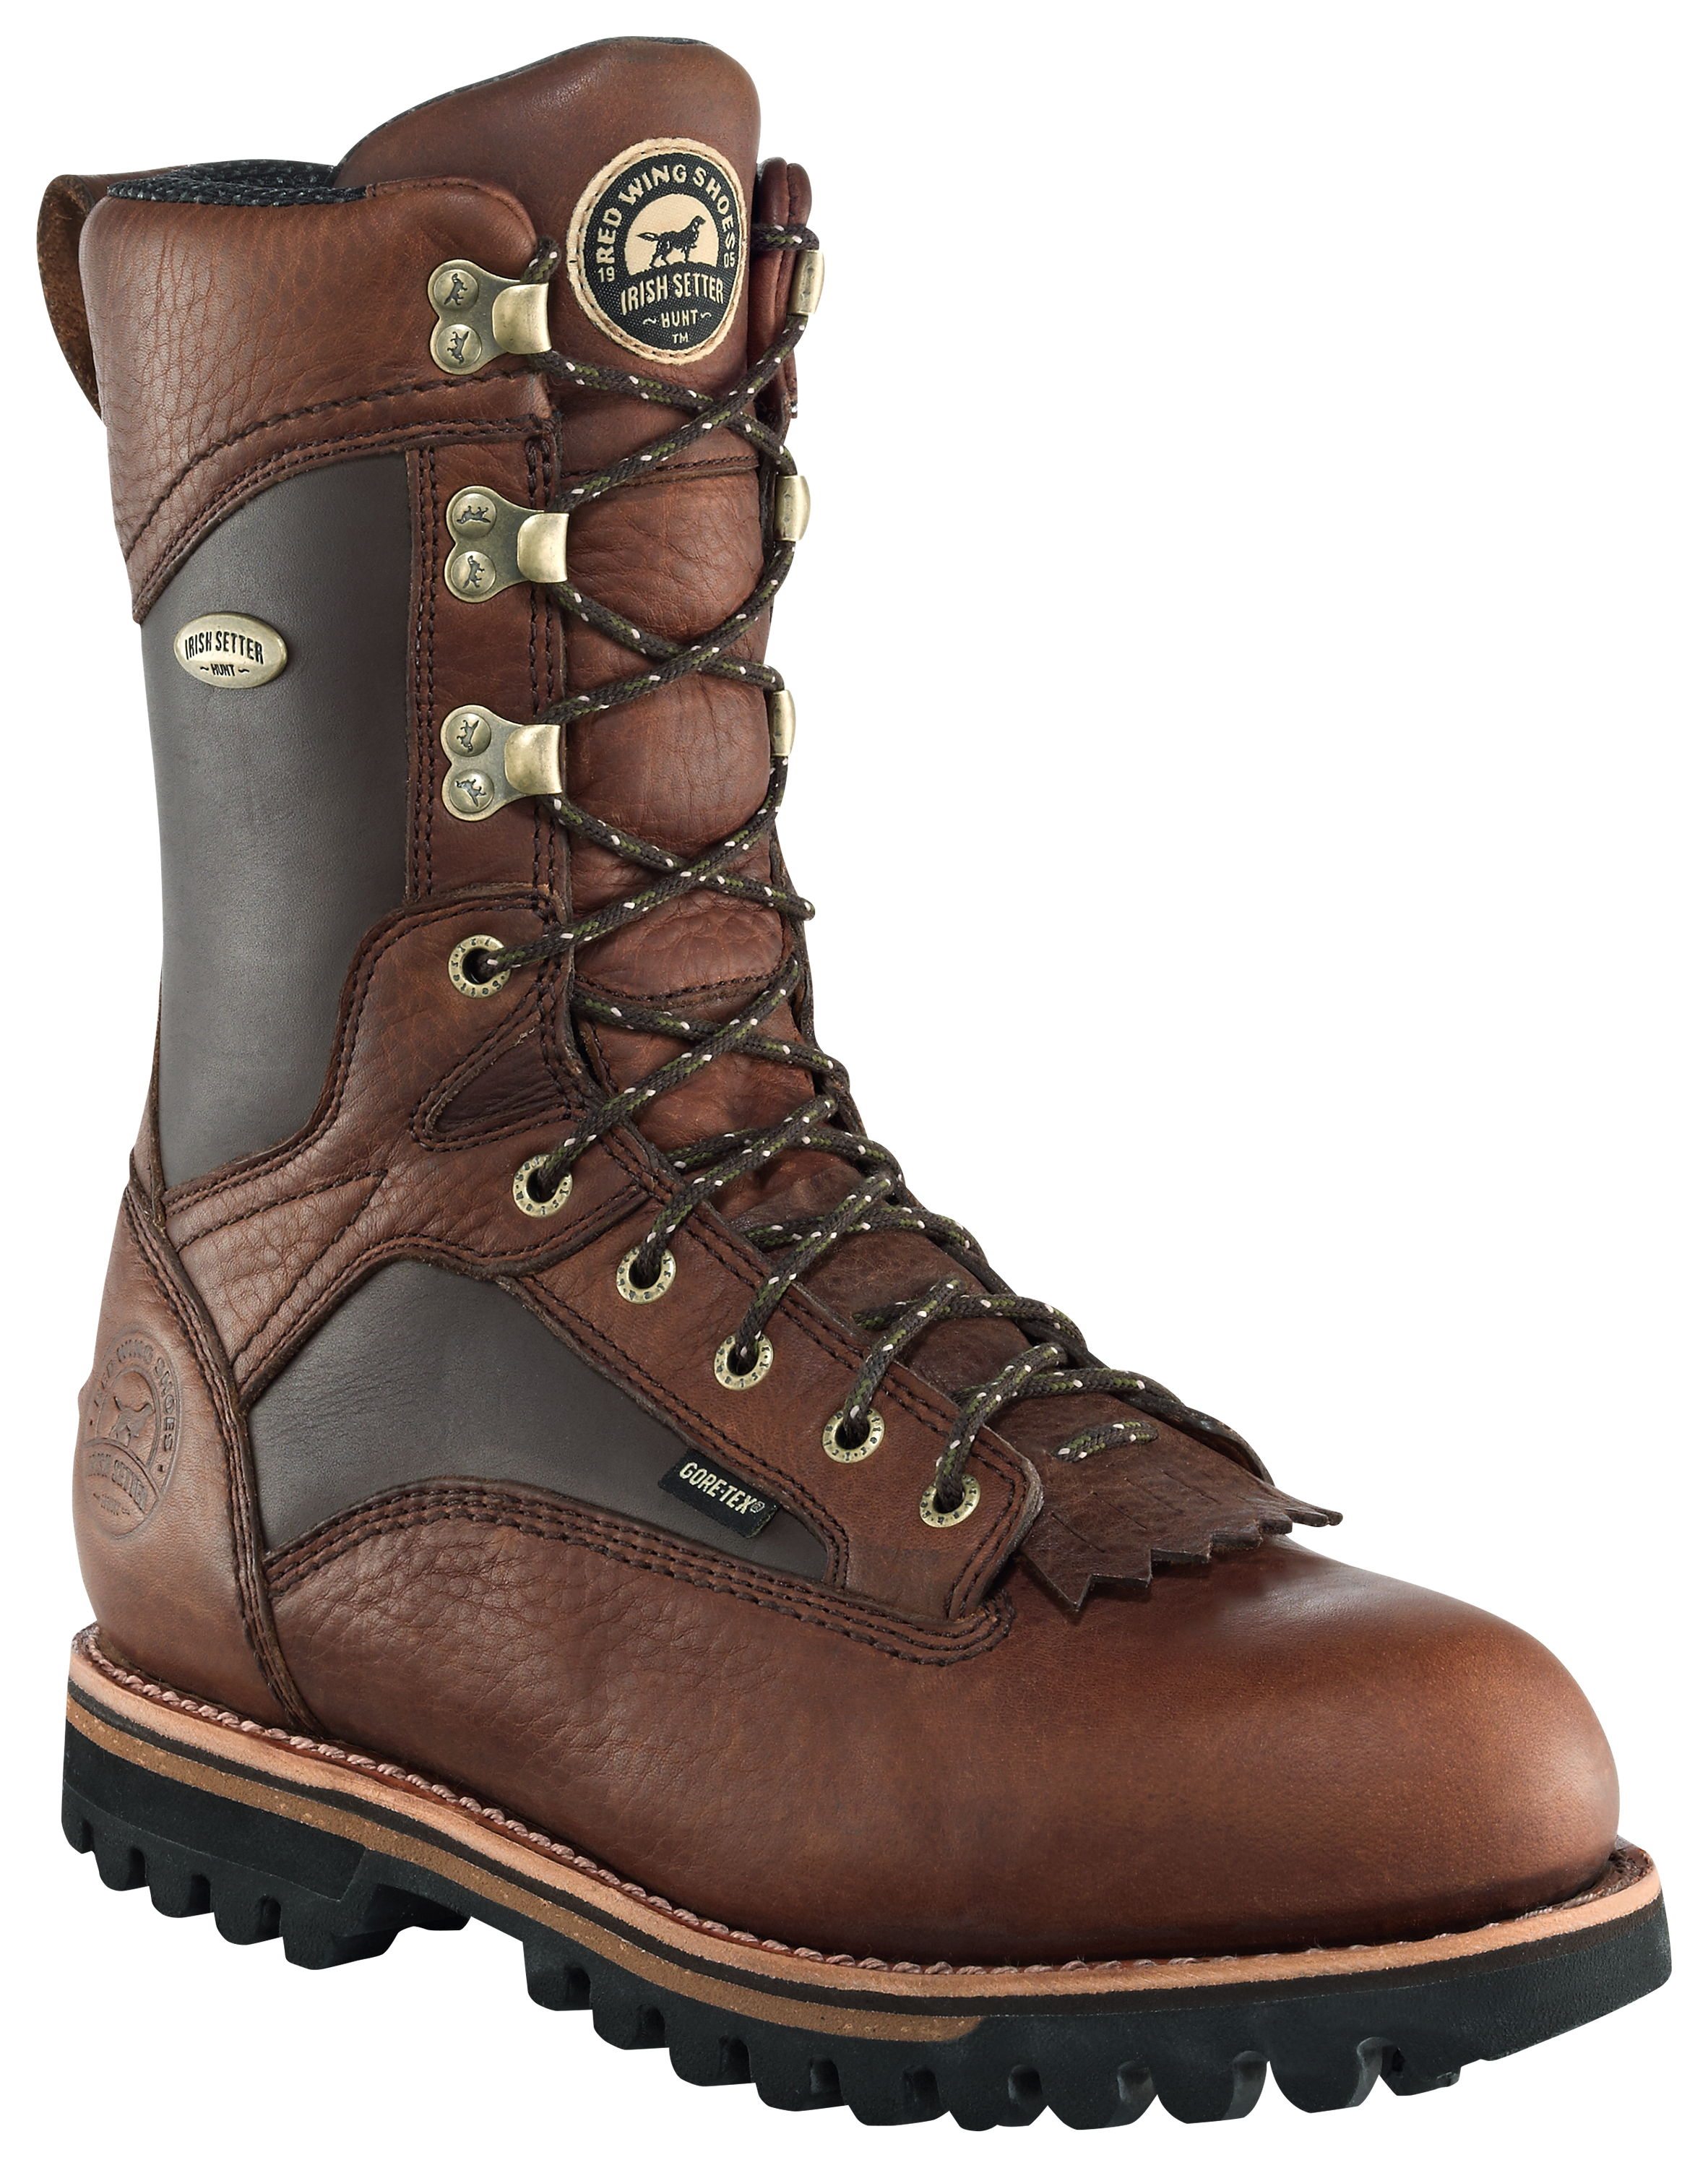 Irish Setter Elk Tracker 12'' 600 Gram Thinsulate Insulated Waterproof Hunting Boots for Men - Brown - 8 Wide EE